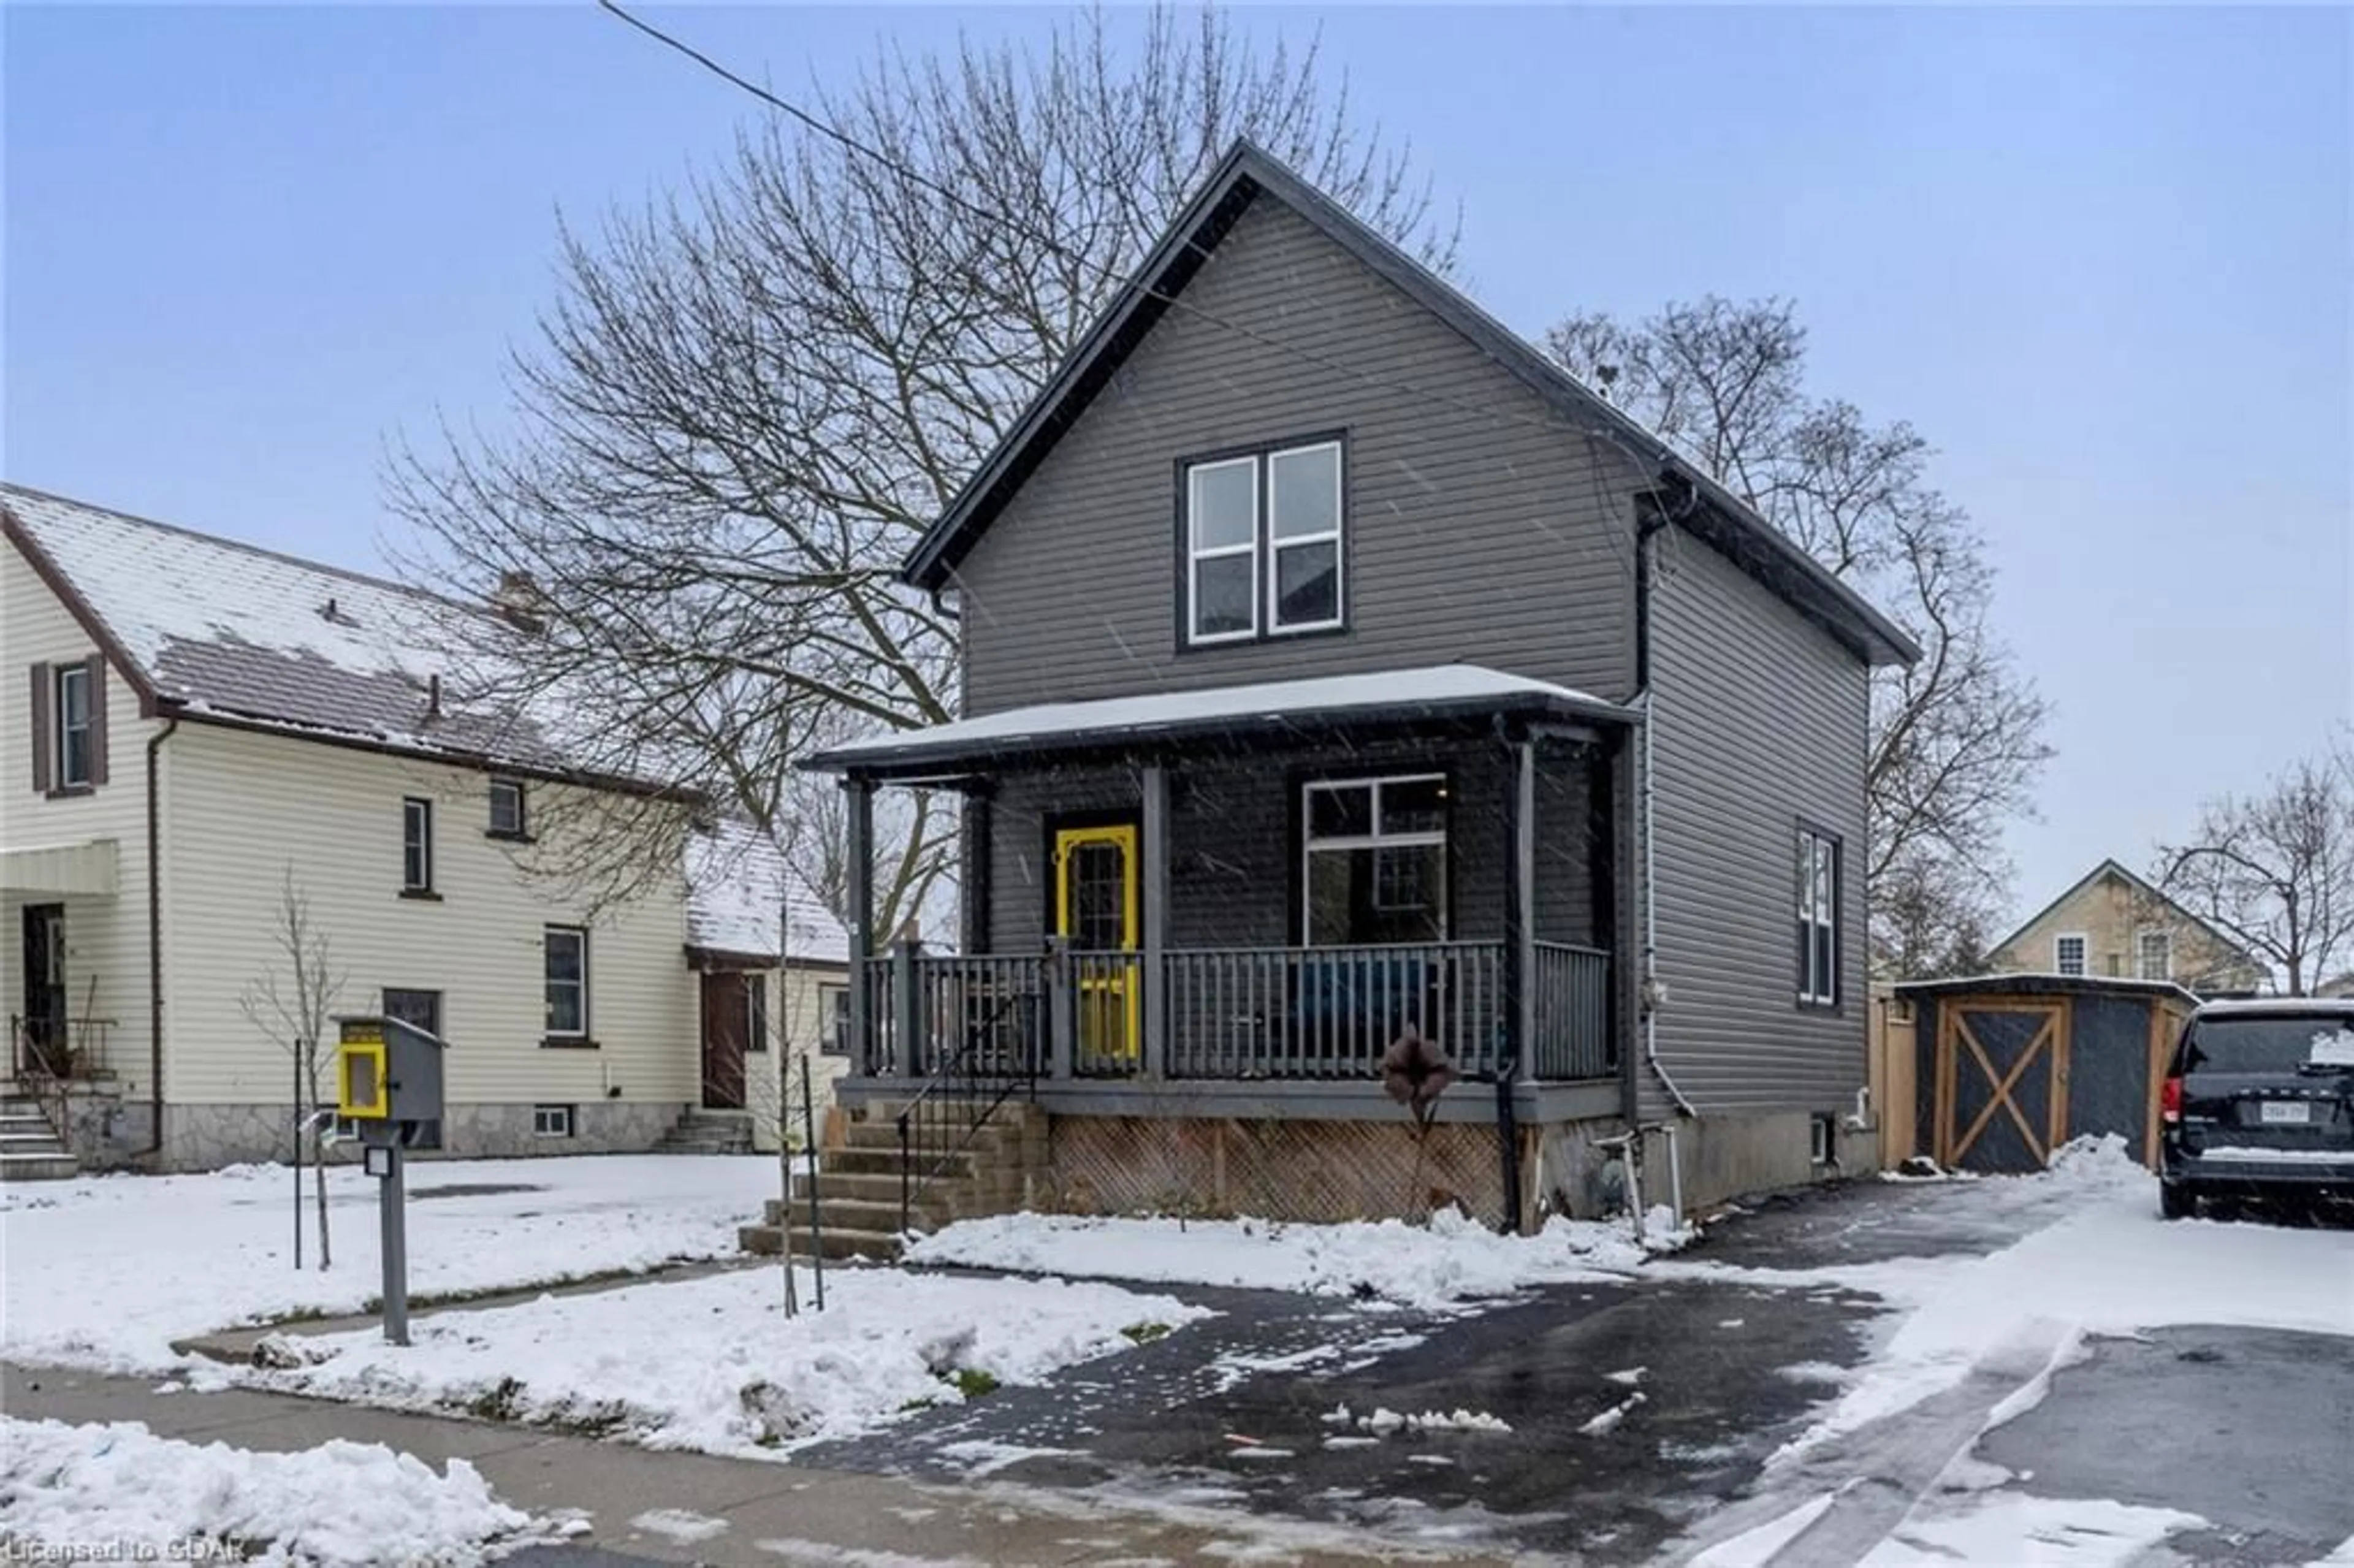 Frontside or backside of a home for 160 King St, Stratford Ontario N5A 4S1